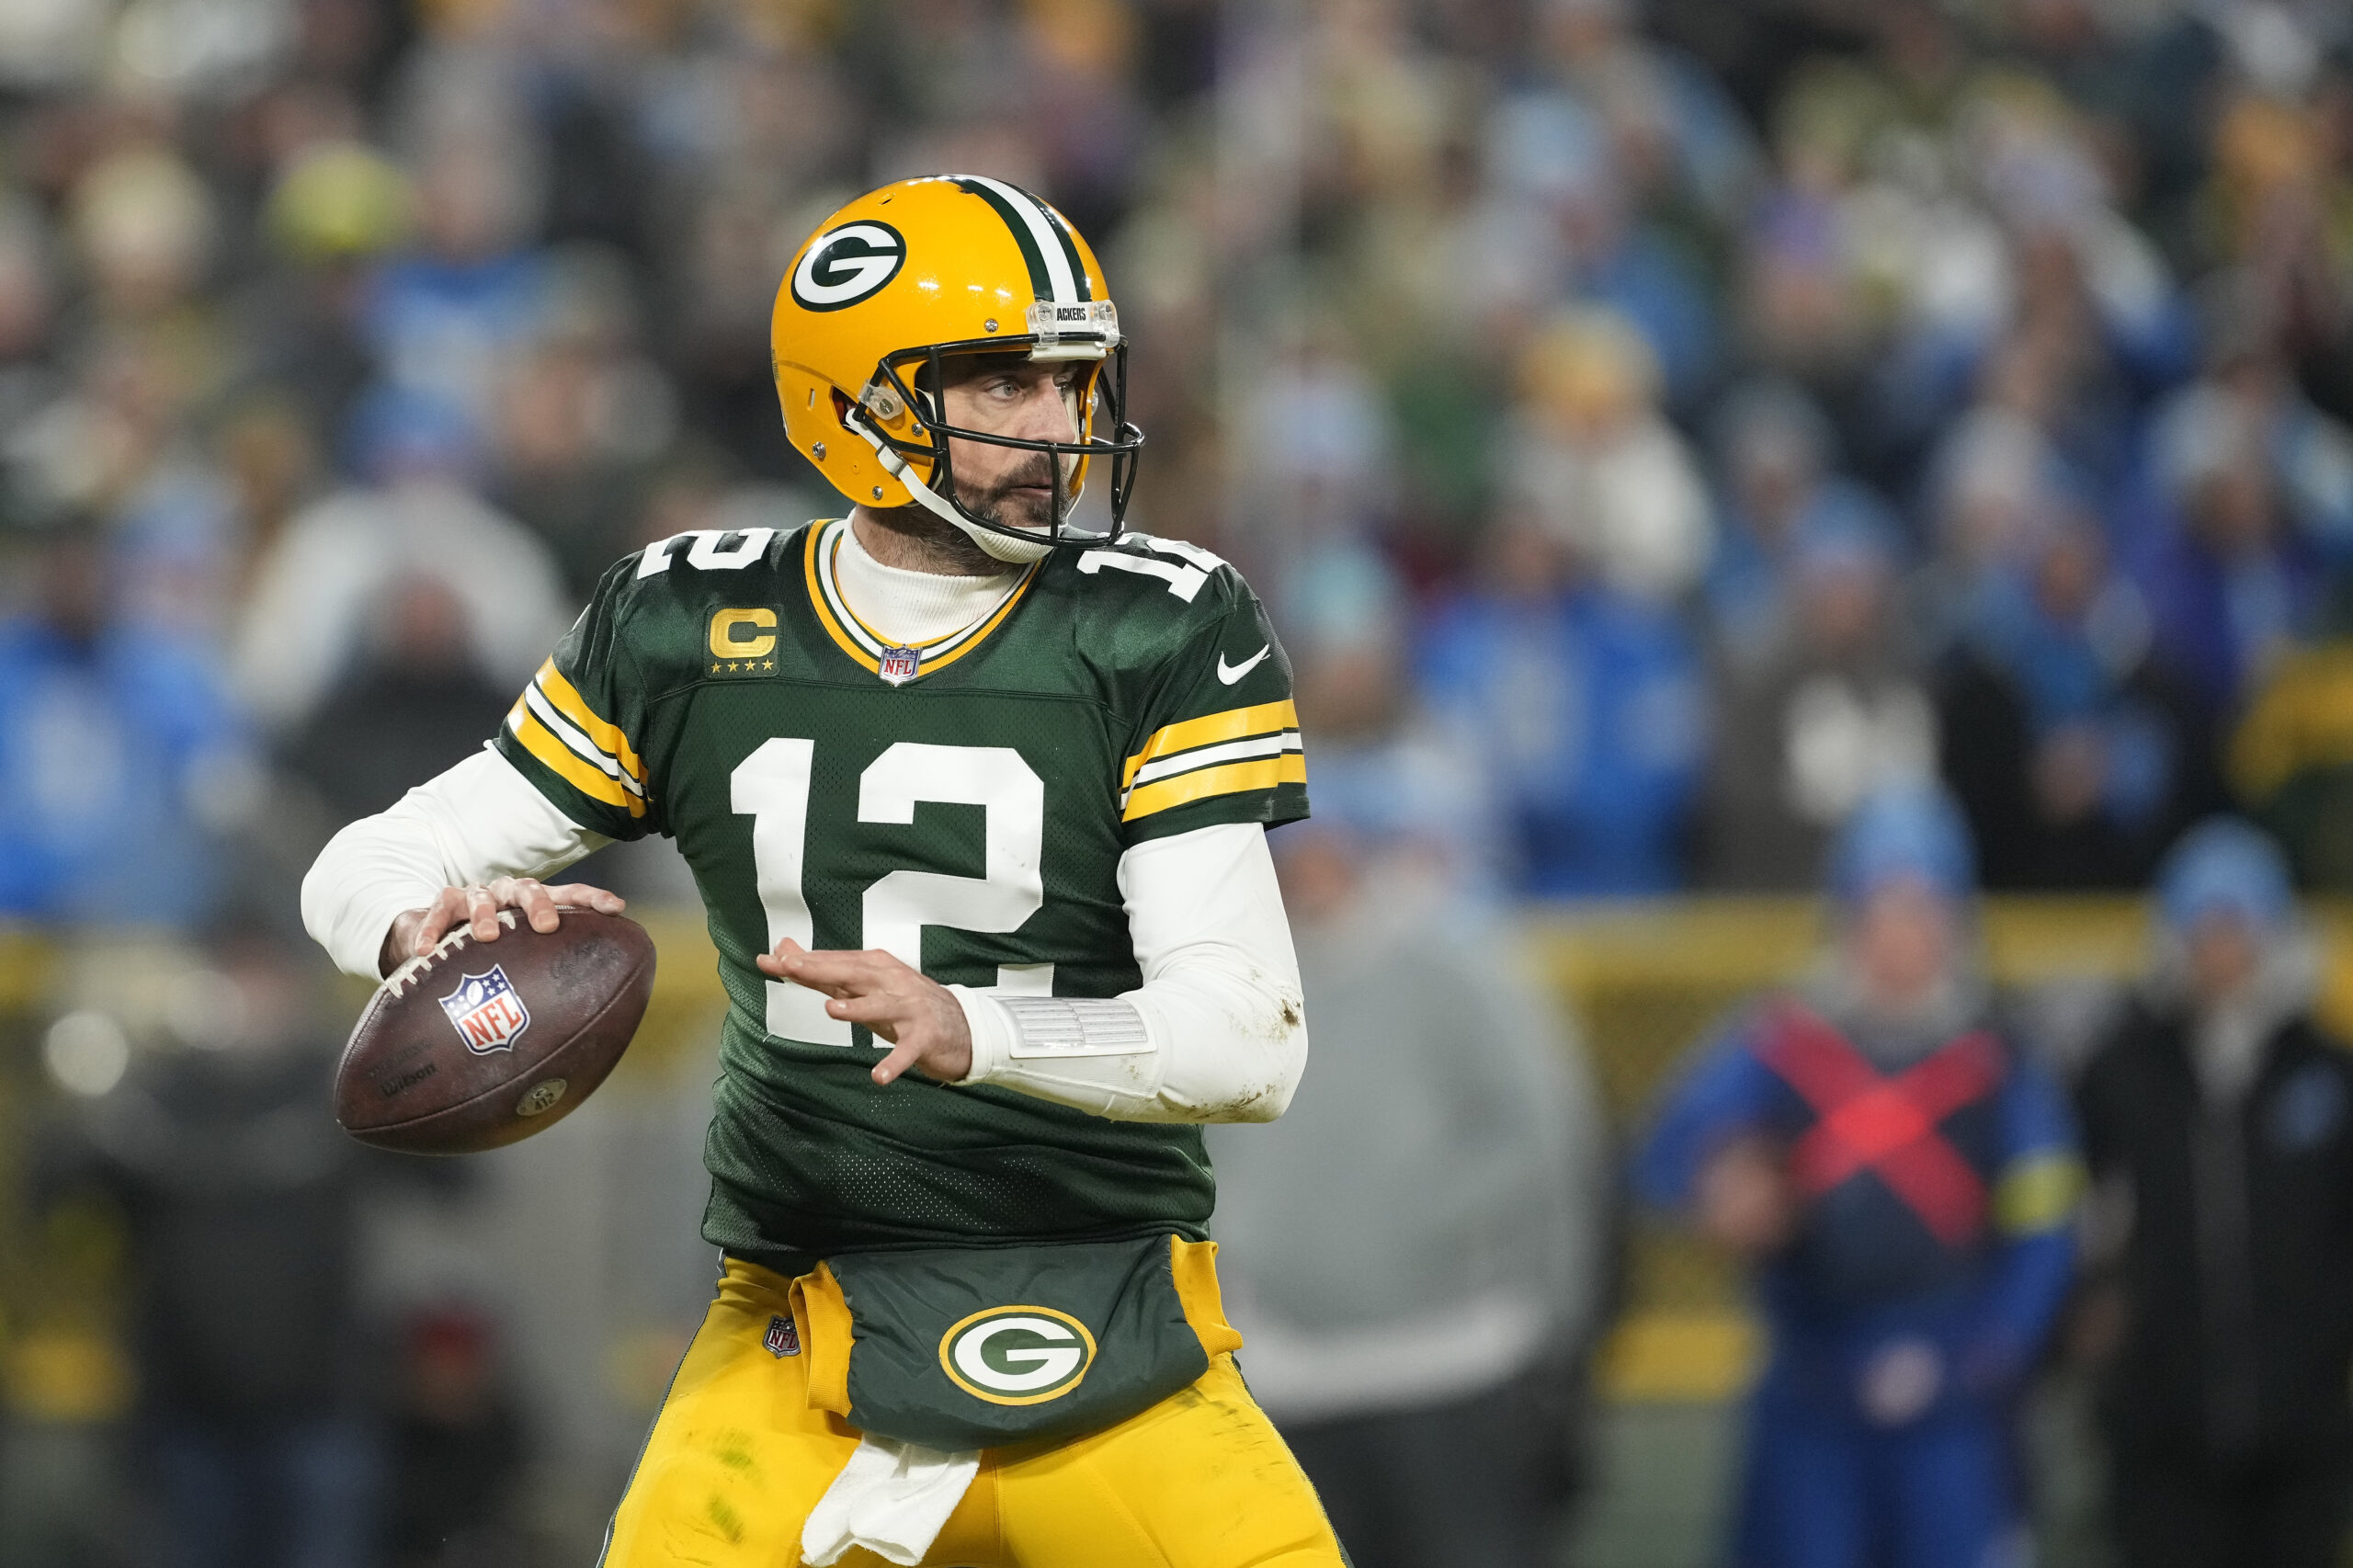 GREEN BAY, WISCONSIN - JANUARY 08: Aaron Rodgers #12 of the Green Bay Packers looks to the throw the pass against the Detroit Lions in the second half at Lambeau Field on January 08, 2023 in Green Bay, Wisconsin. (Photo by Patrick McDermott/Getty Images)